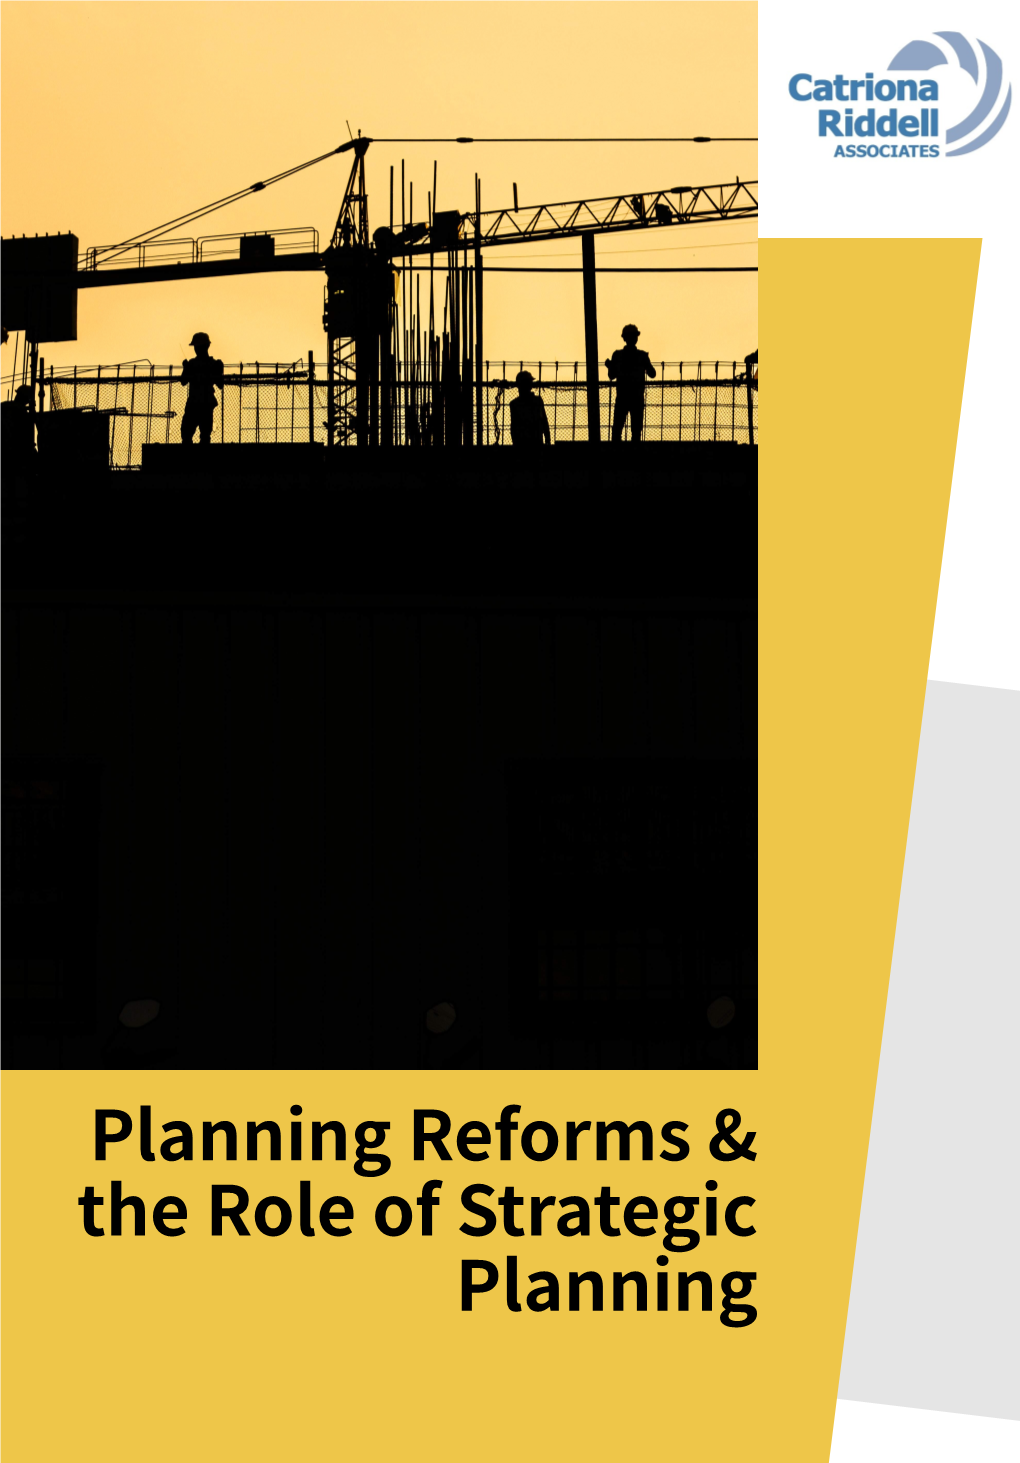 Planning Reforms & the Role of Strategic Planning